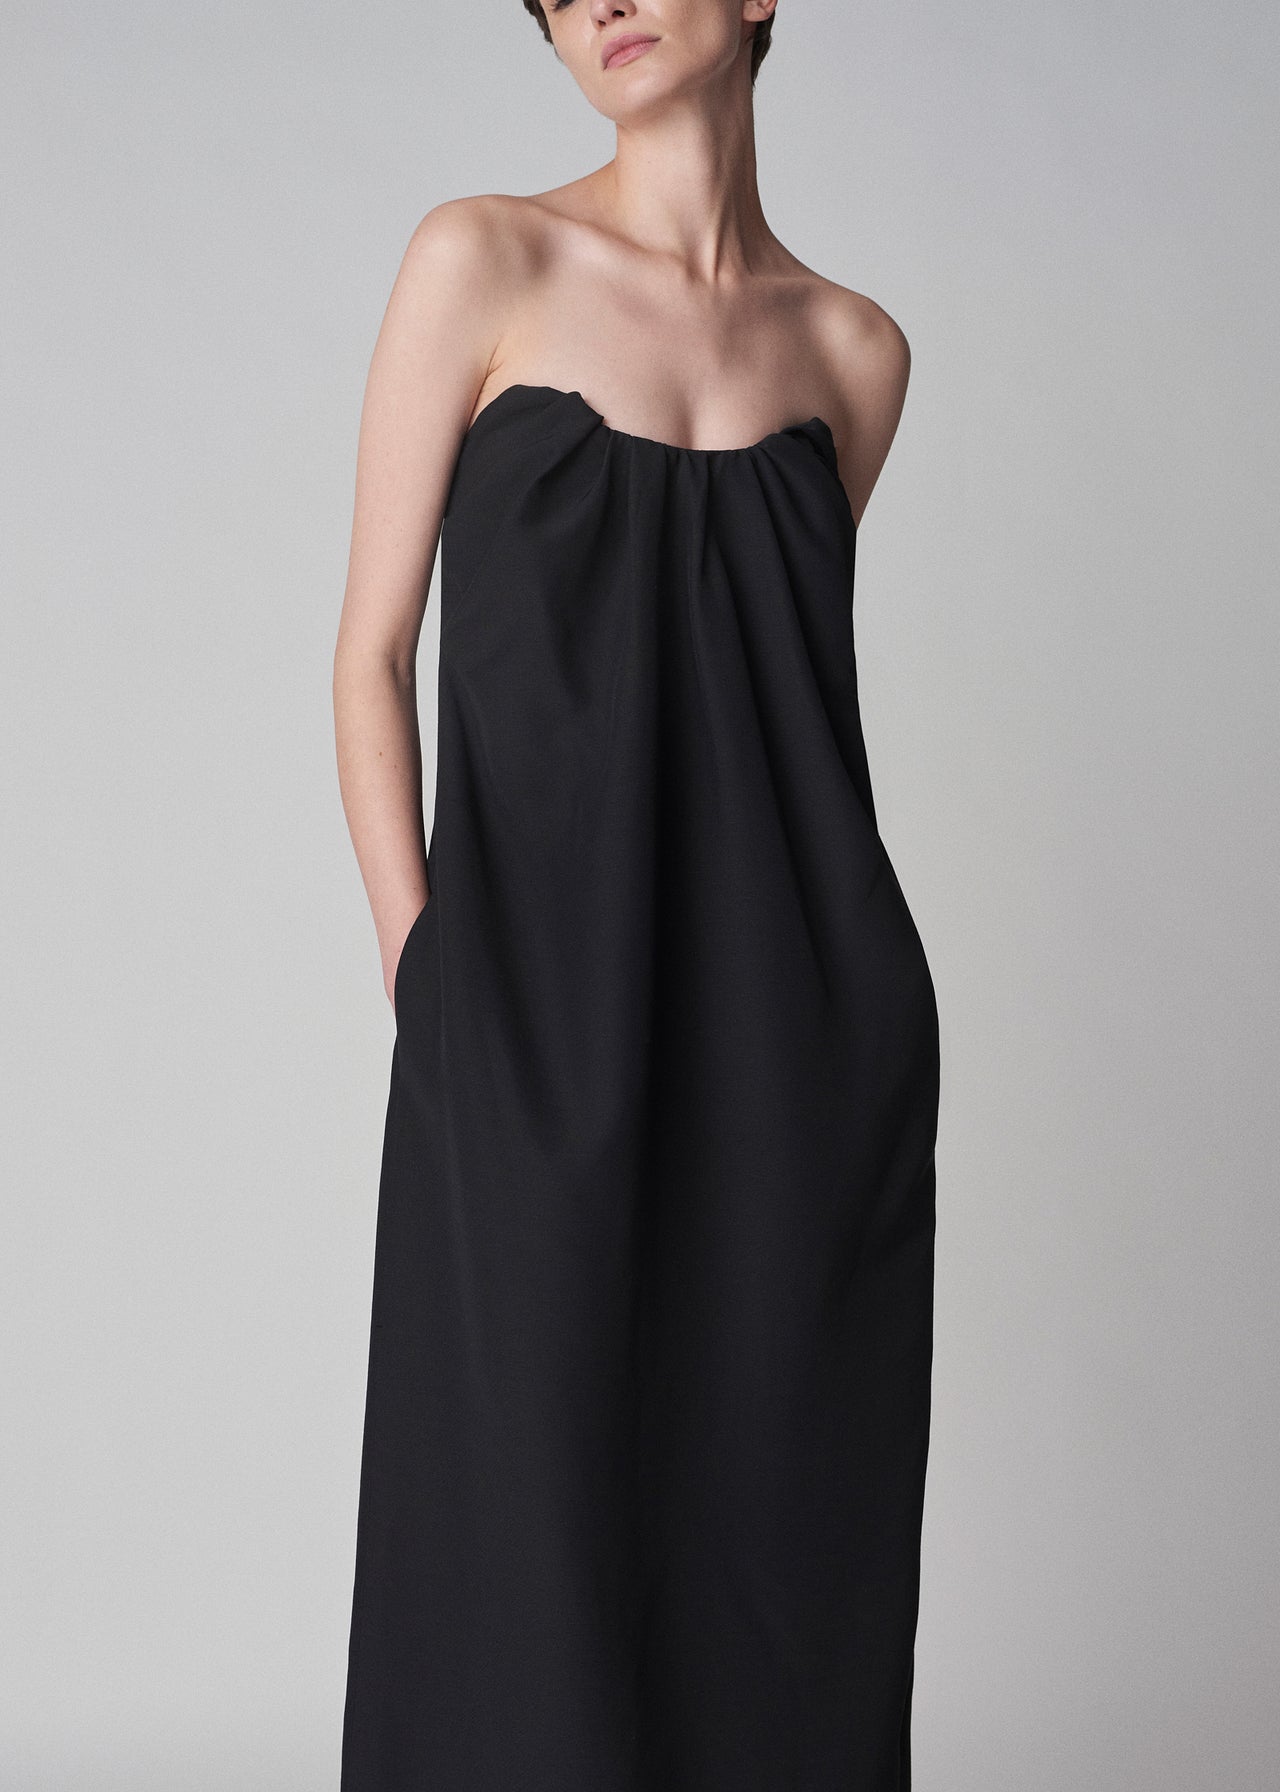 Bustier Dress in Smooth Faille - Black - CO